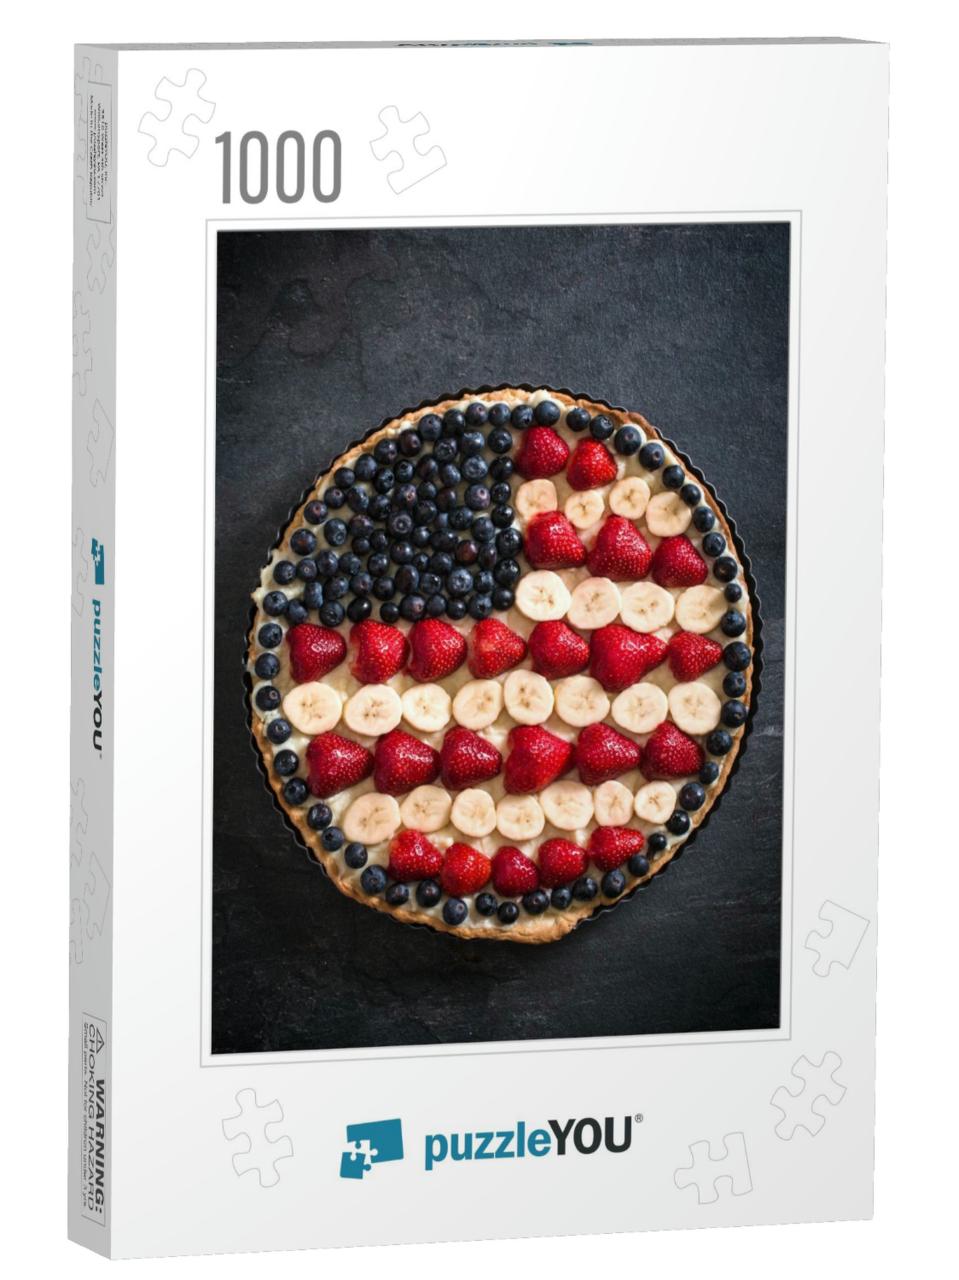 Sweet Fruit & Vanilla Pie with USA Flag on the Top, Select... Jigsaw Puzzle with 1000 pieces